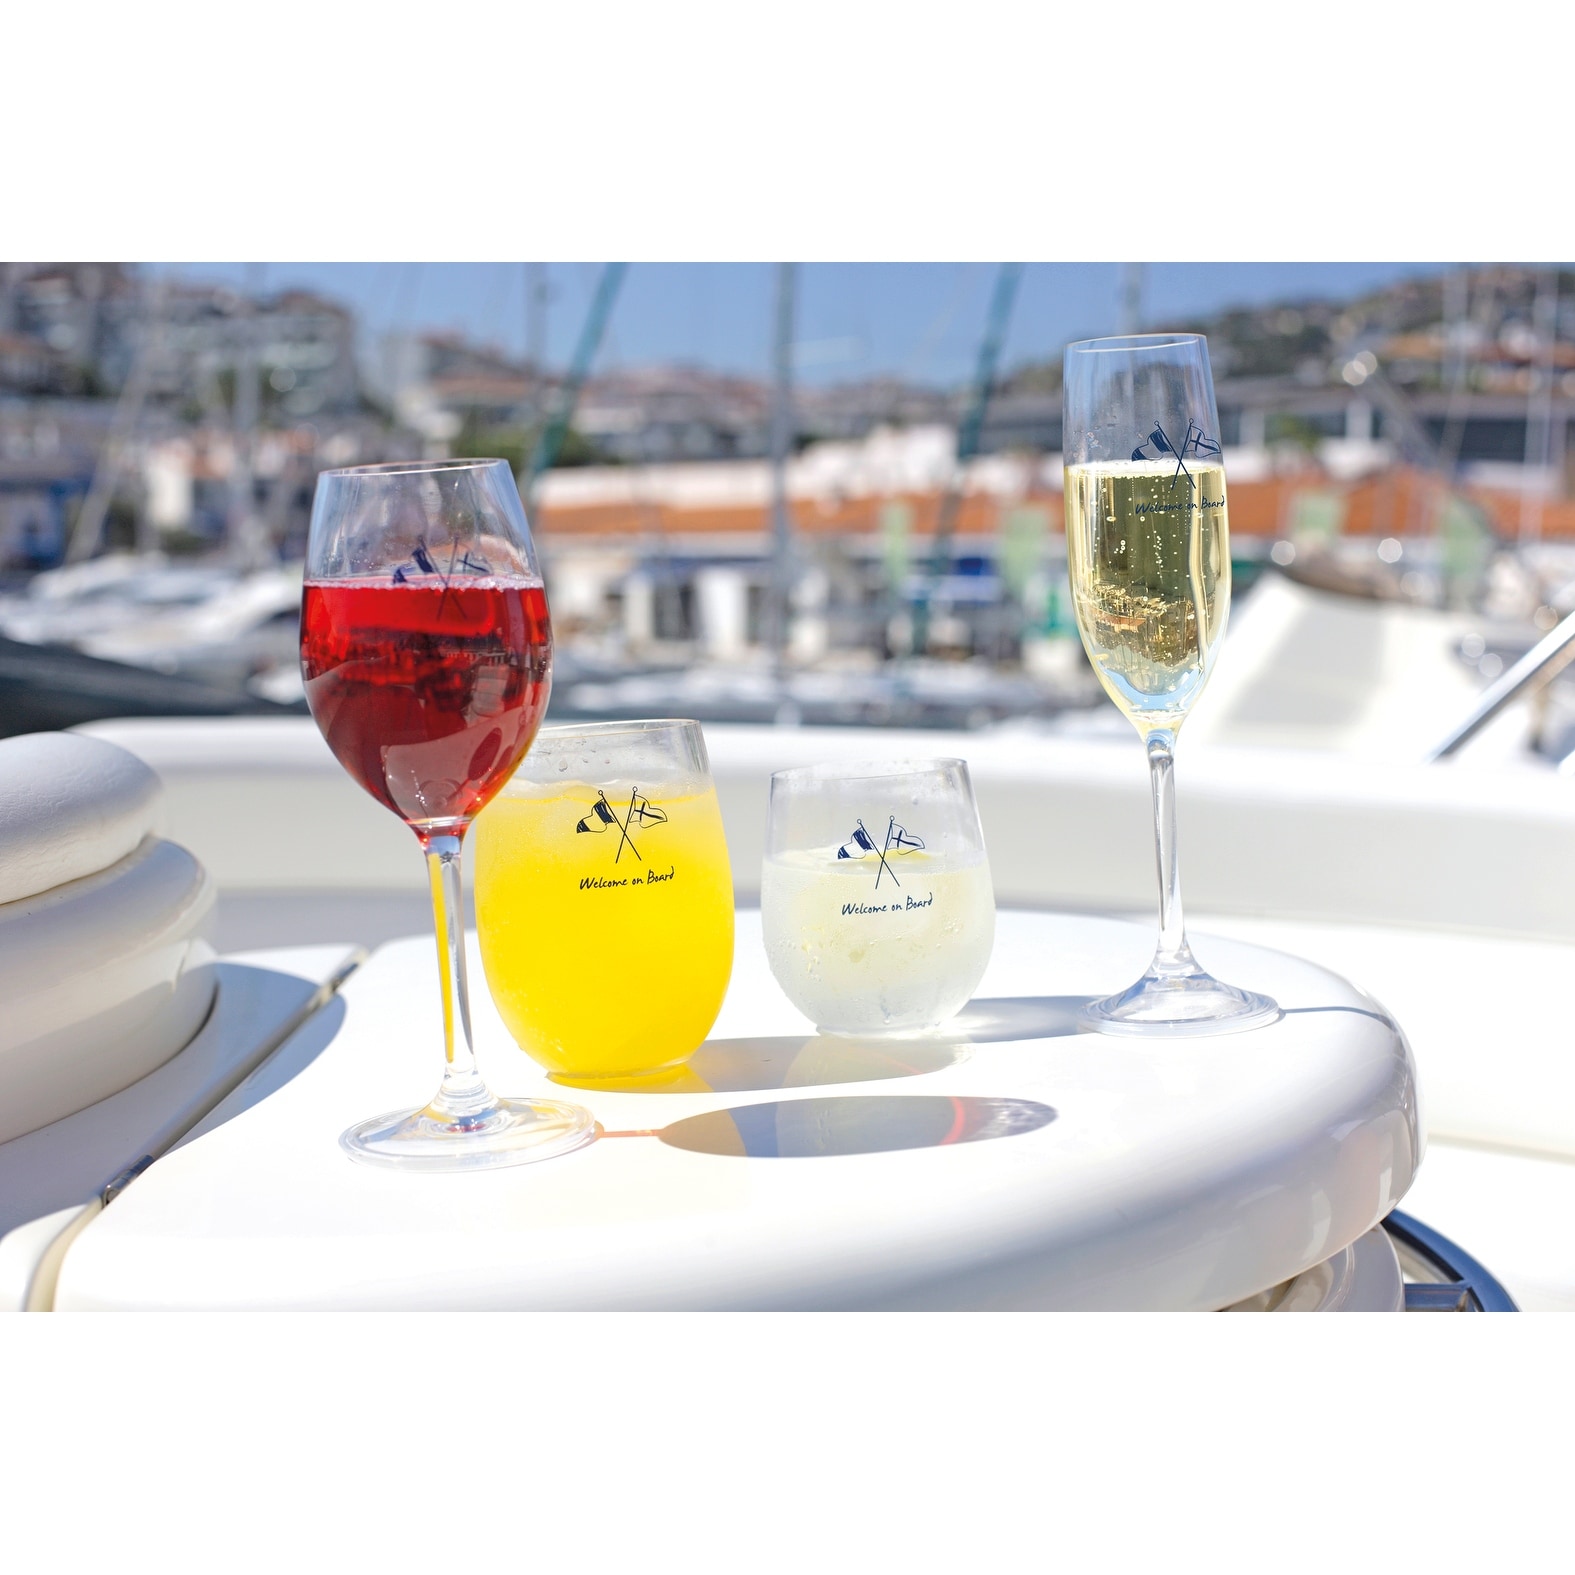 https://ak1.ostkcdn.com/images/products/is/images/direct/e50100e3c92fa3eafea2f20b4f577463d2ffa3d8/Welcome-on-Board-Non-Slip-Wine-Glass---Set-of-6.jpg